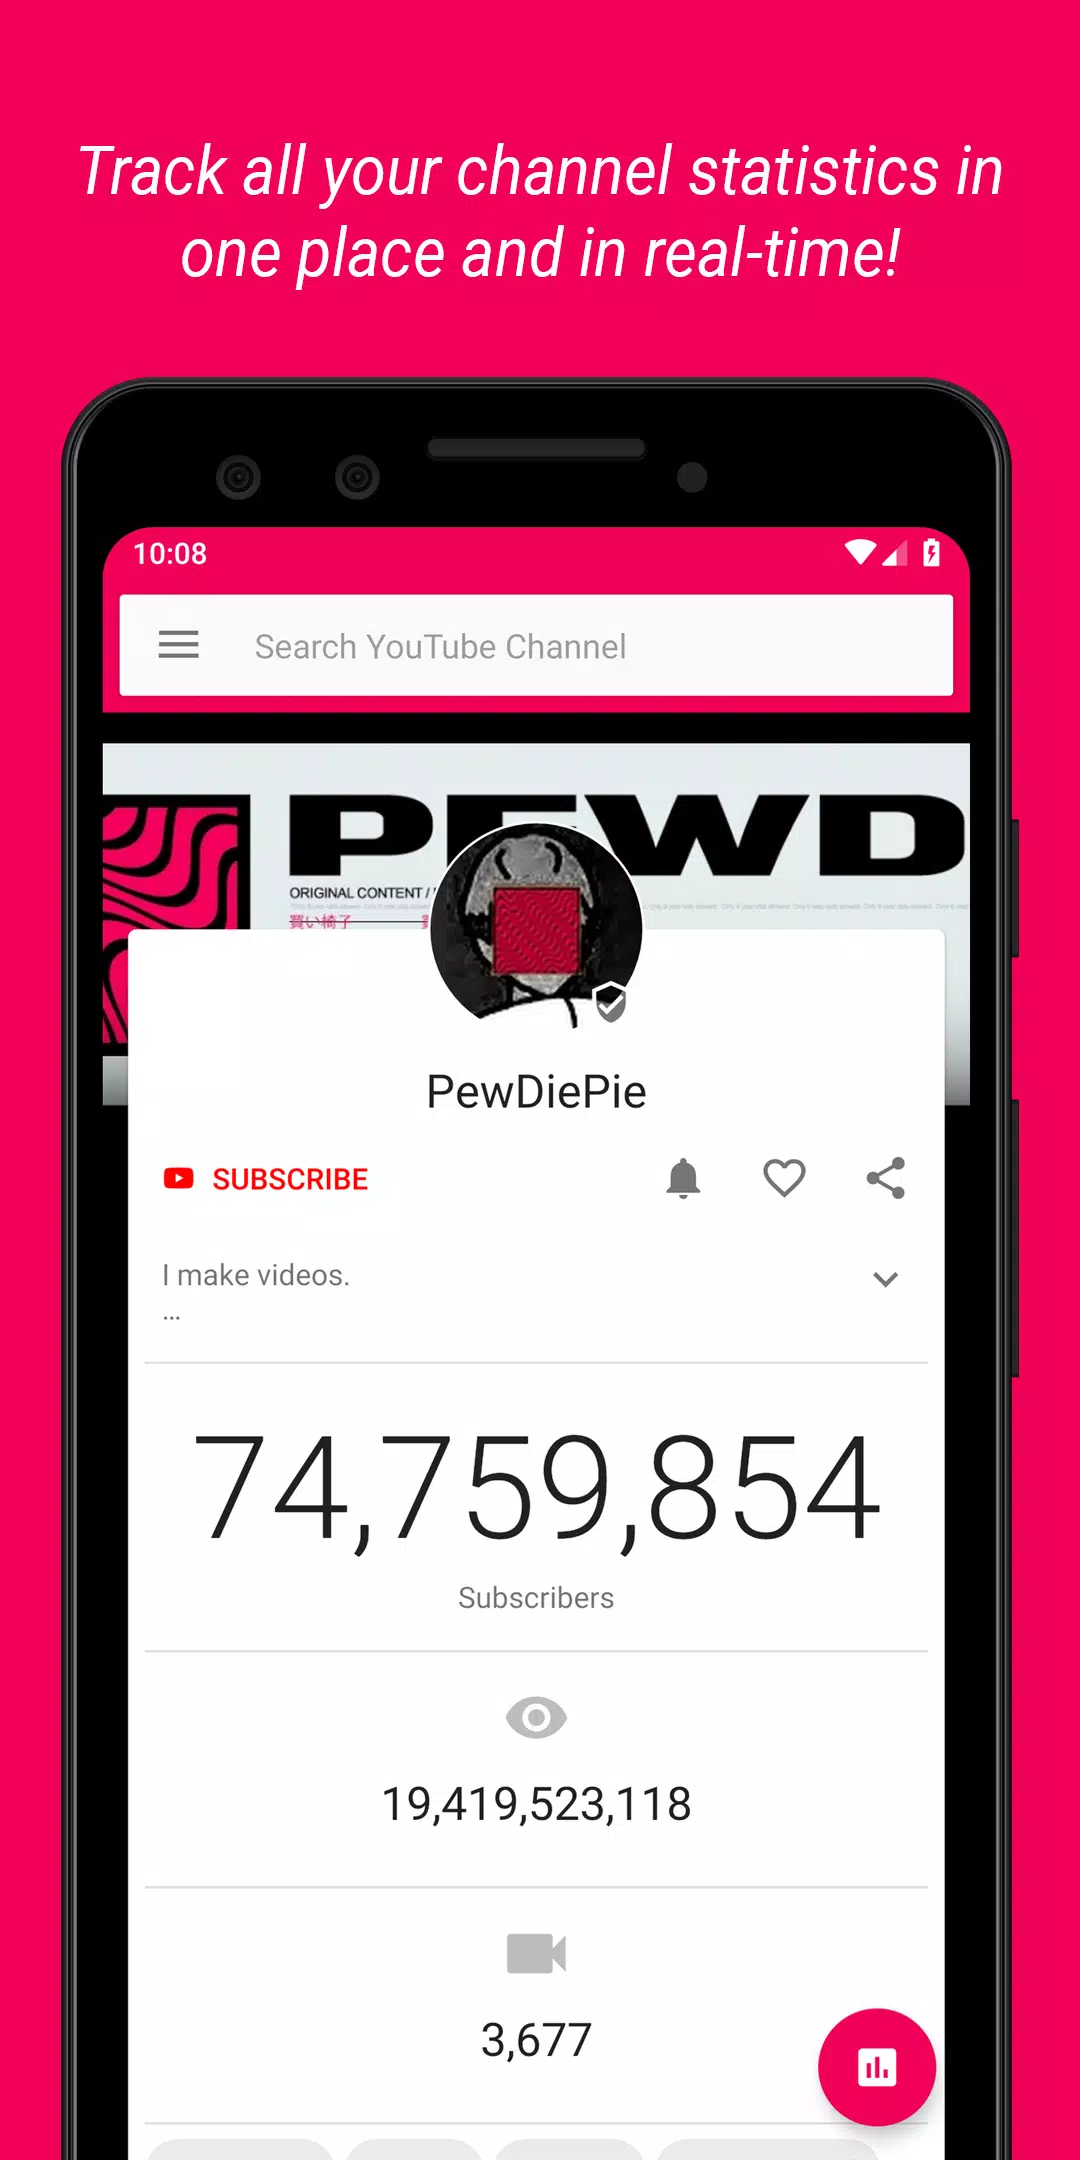 Live  Subscriber Count Apk Download for Android- Latest